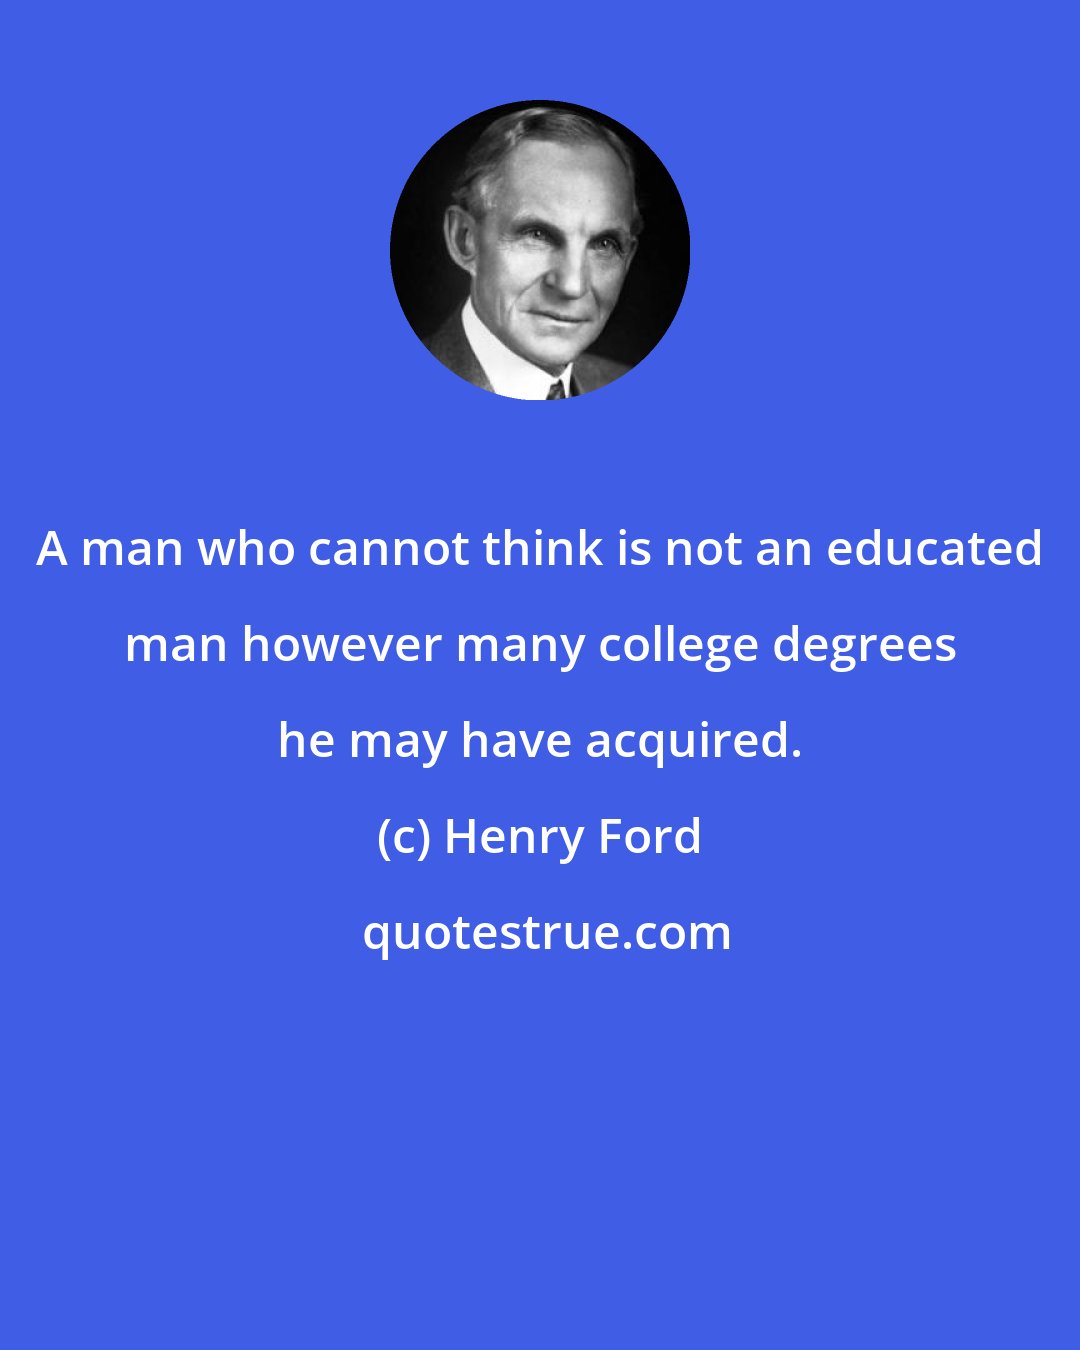 Henry Ford: A man who cannot think is not an educated man however many college degrees he may have acquired.